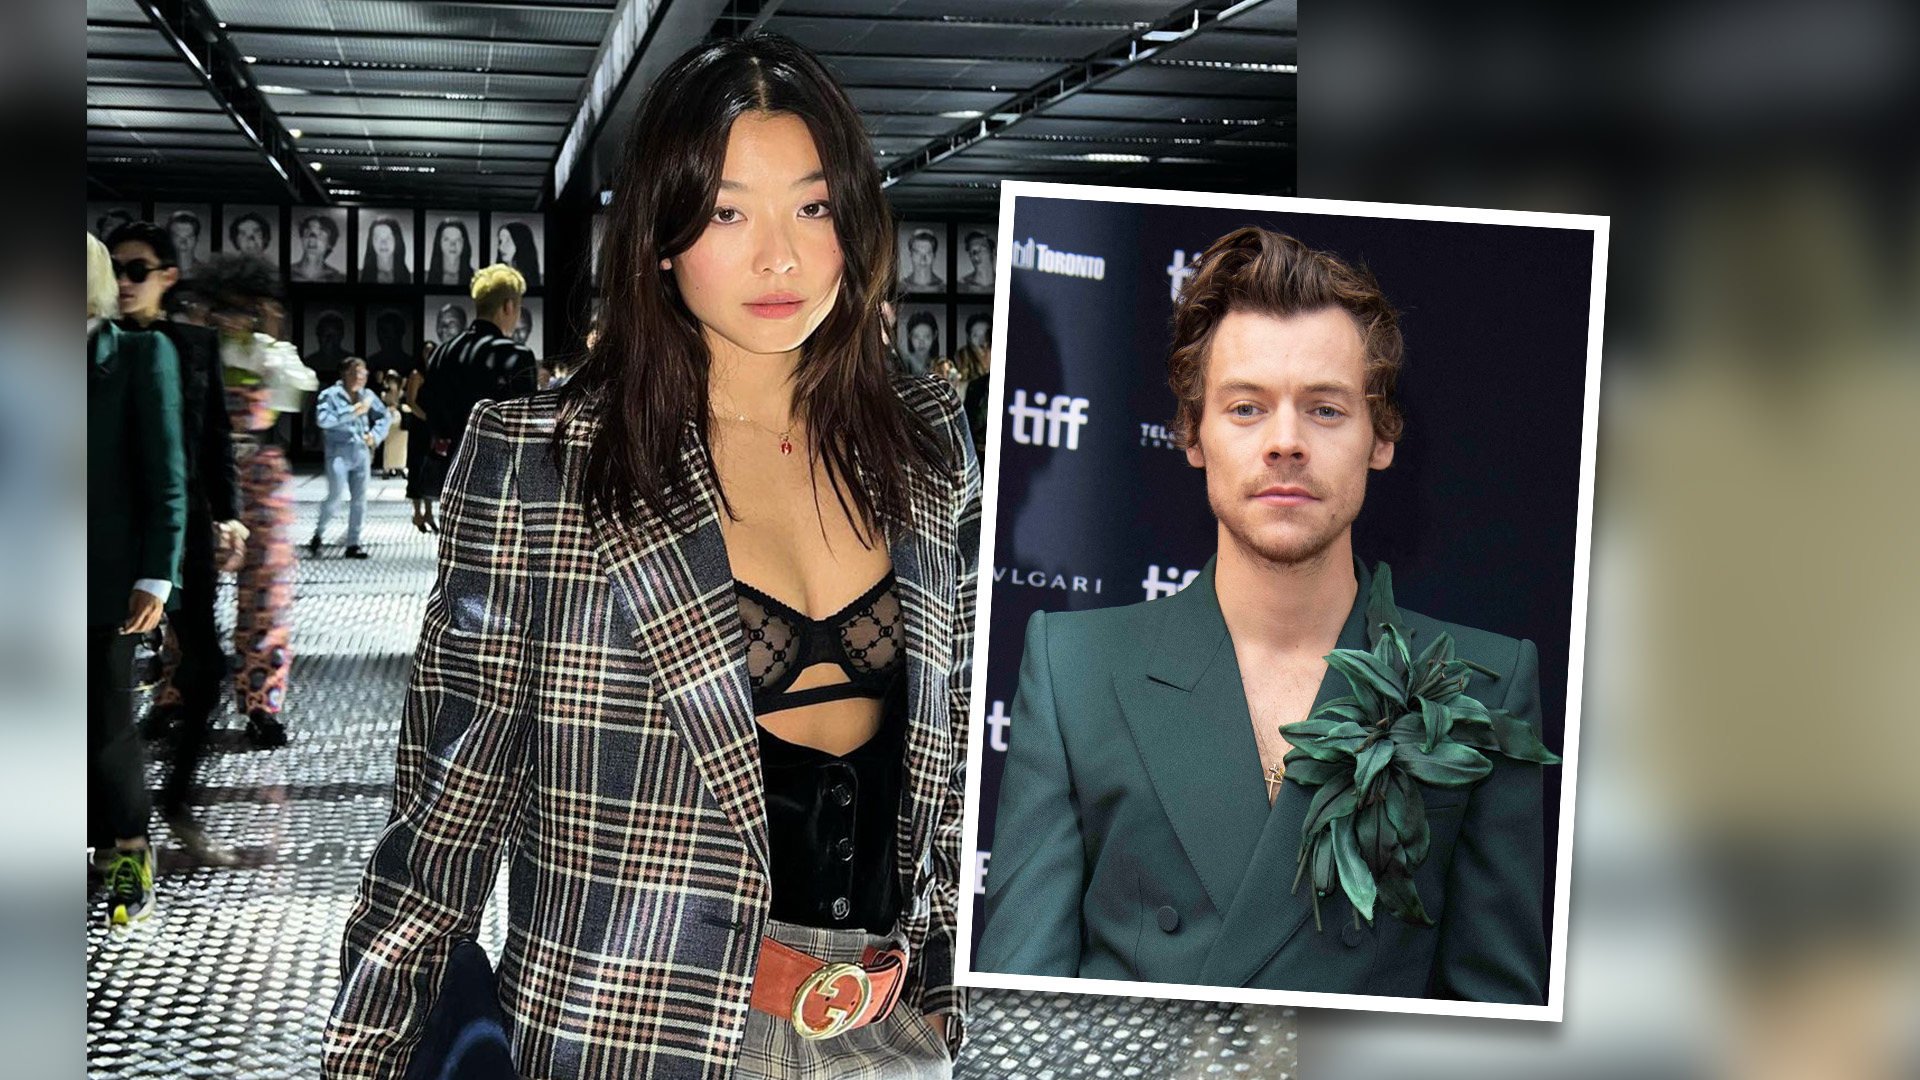 Hong Kong-born fashion influencer Yan Yan Chan has been linked romantically to British pop star Harry Styles, creating headlines around the world. Photo: SCMP composite